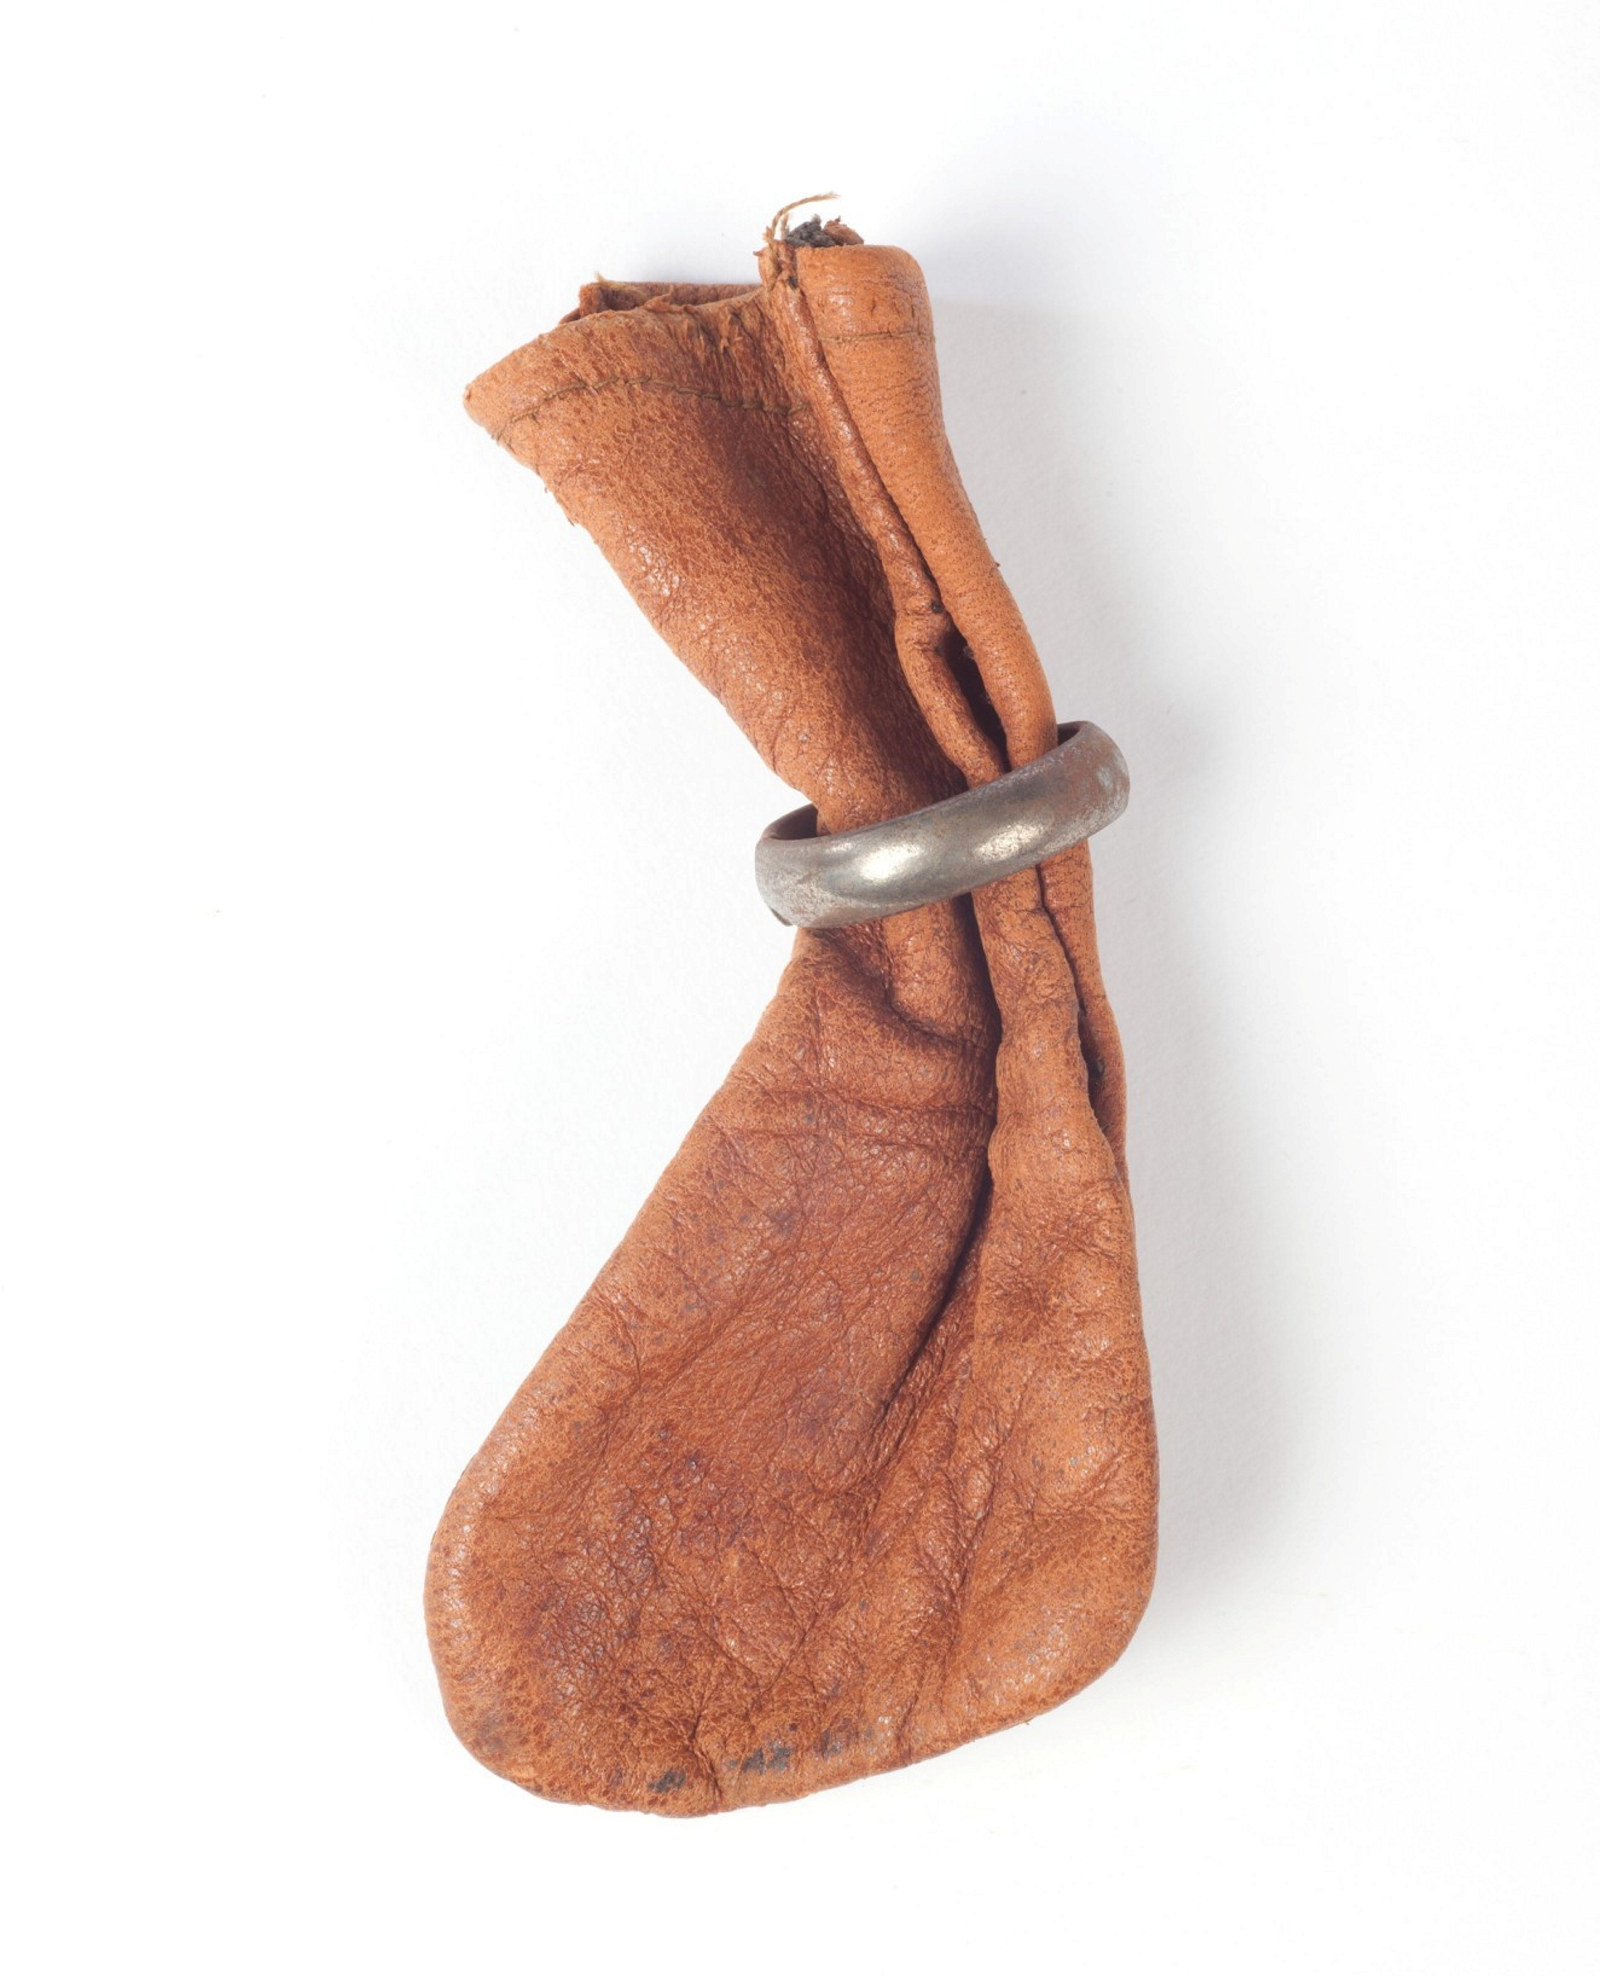 Tobacco pouch belonging to a trooper